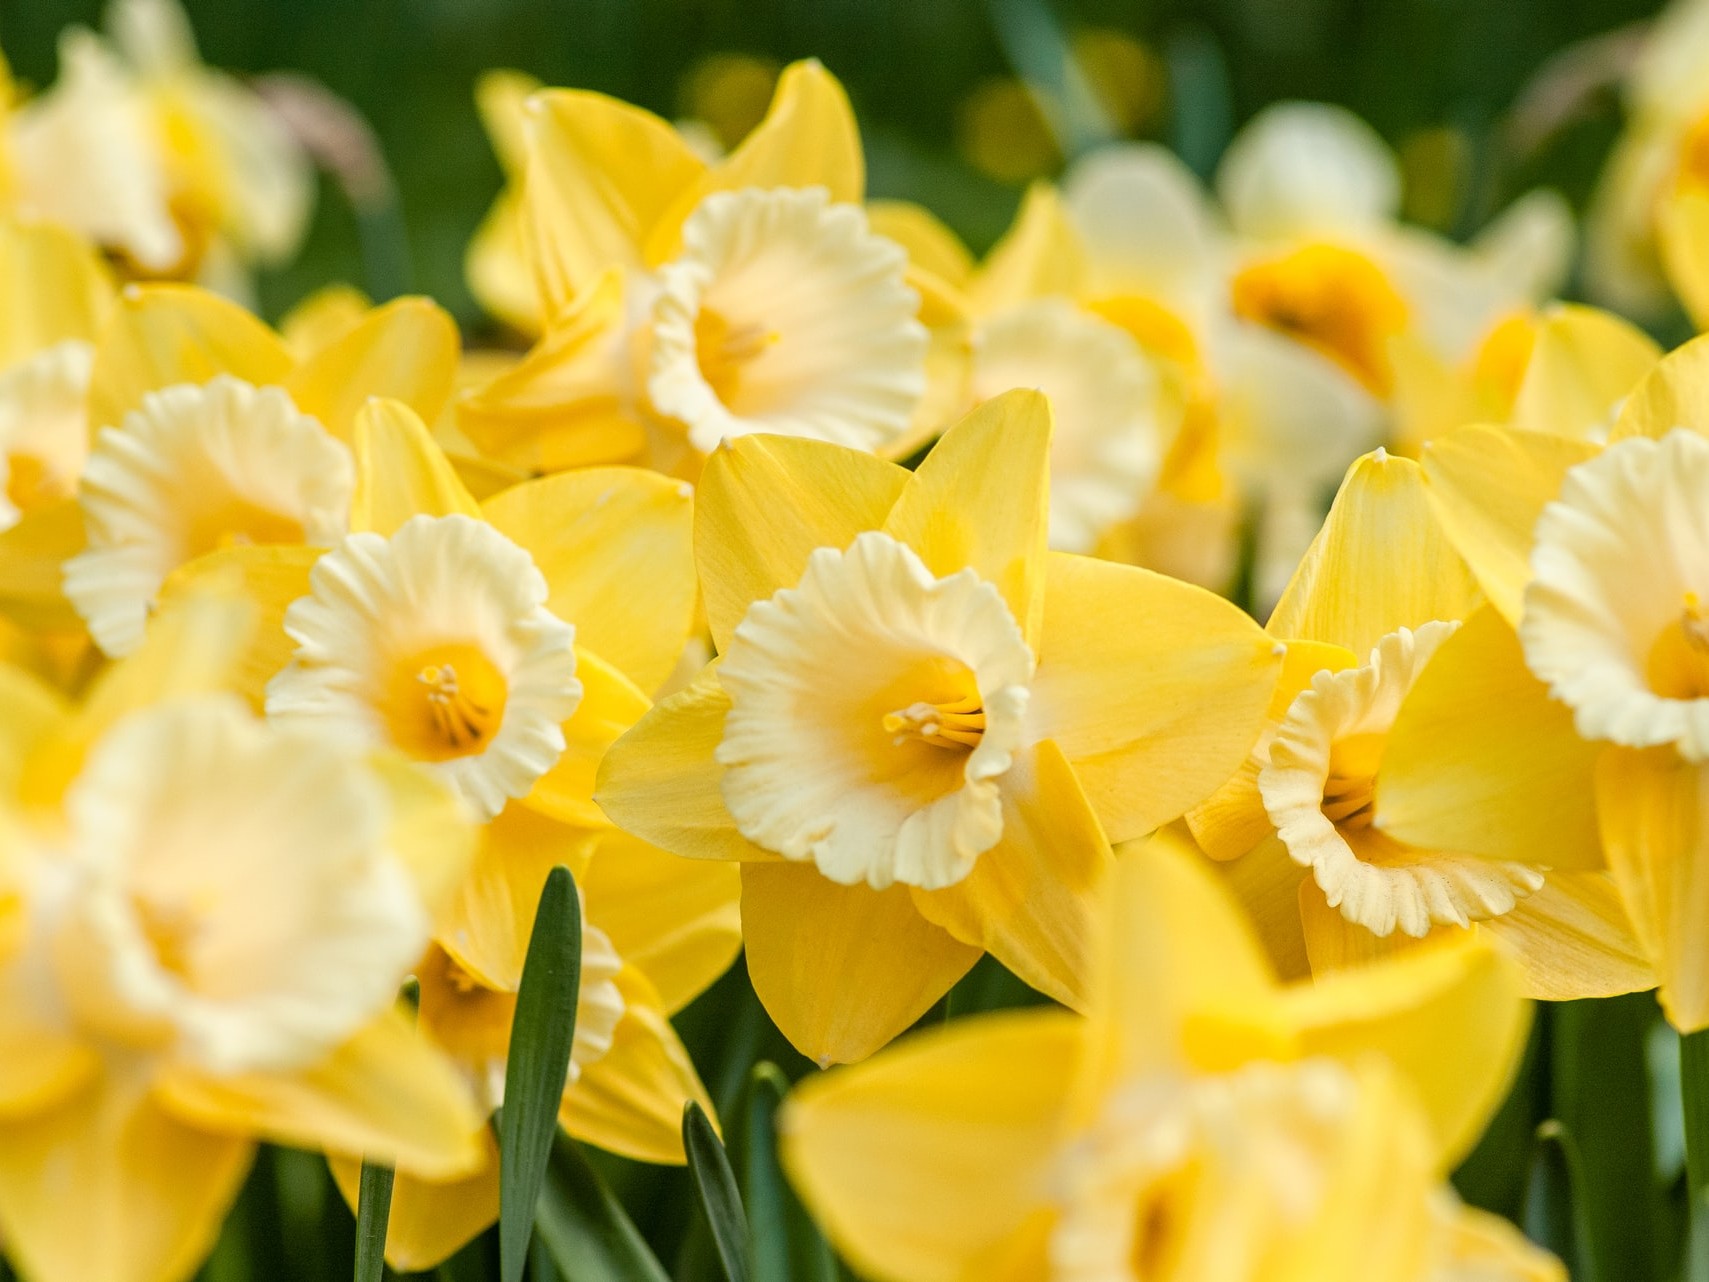 Daffodils from Wales